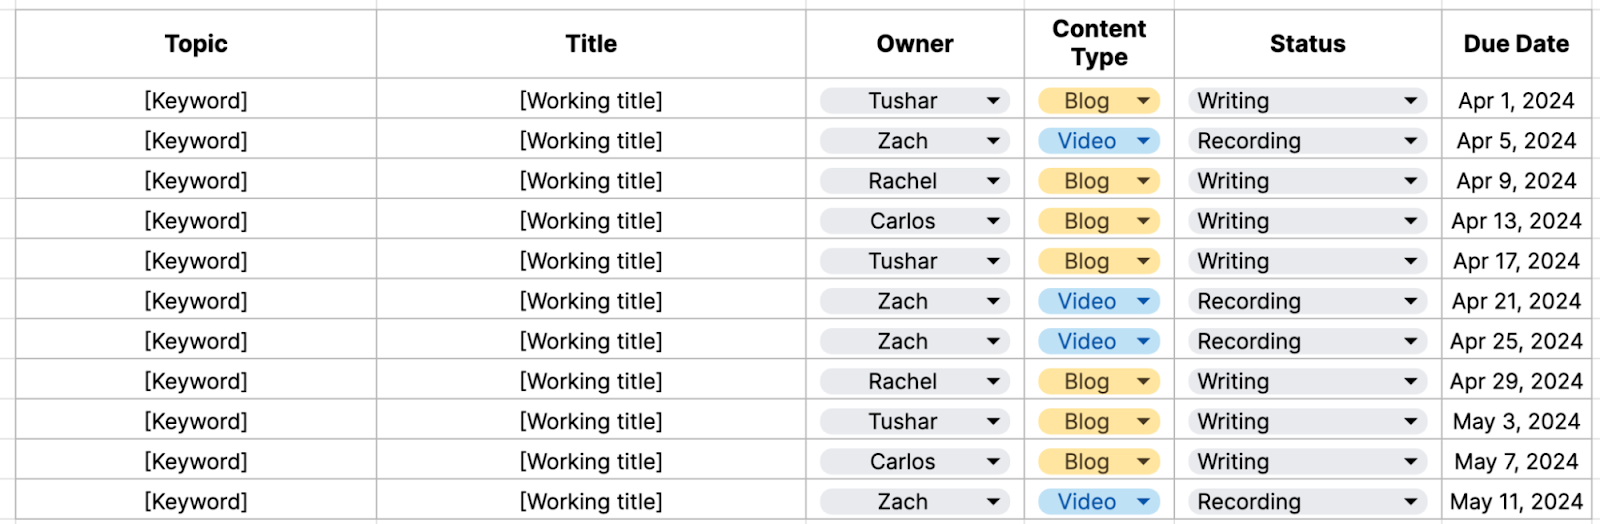 A content calendar example in Google Sheets by Semrush